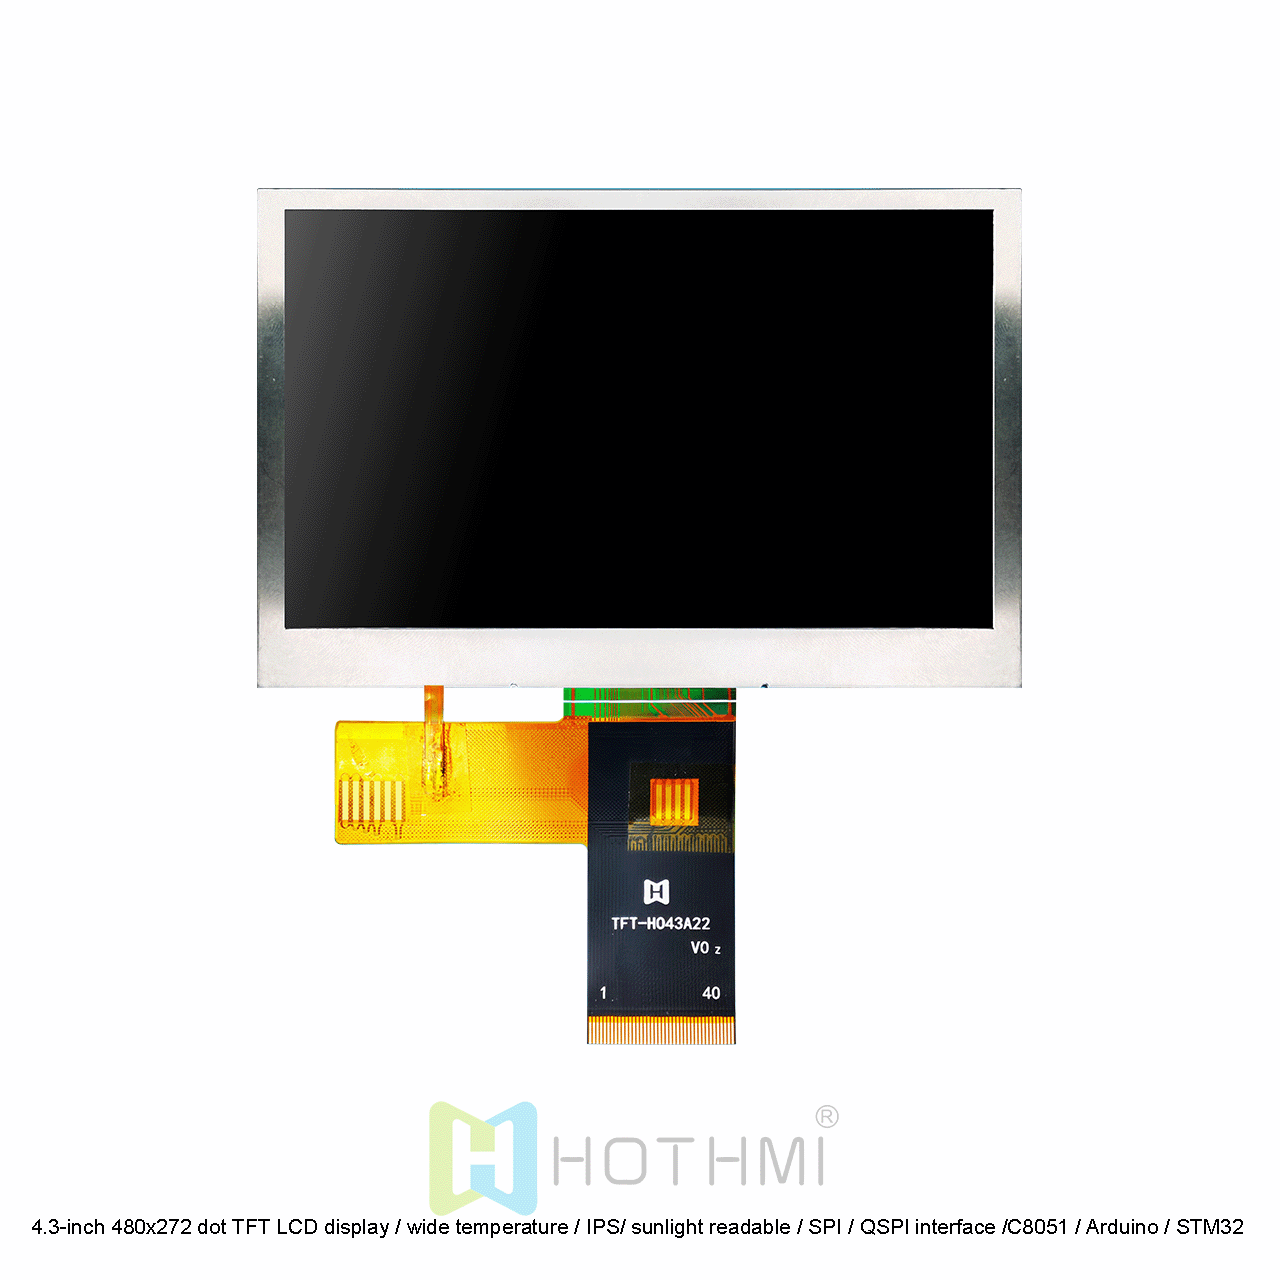 4.3-inch 480x272 dot TFT LCD display / wide temperature / IPS full viewing angle / sunlight readable / SPI / QSPI interface / optional touch C8051 / Arduino / STM32